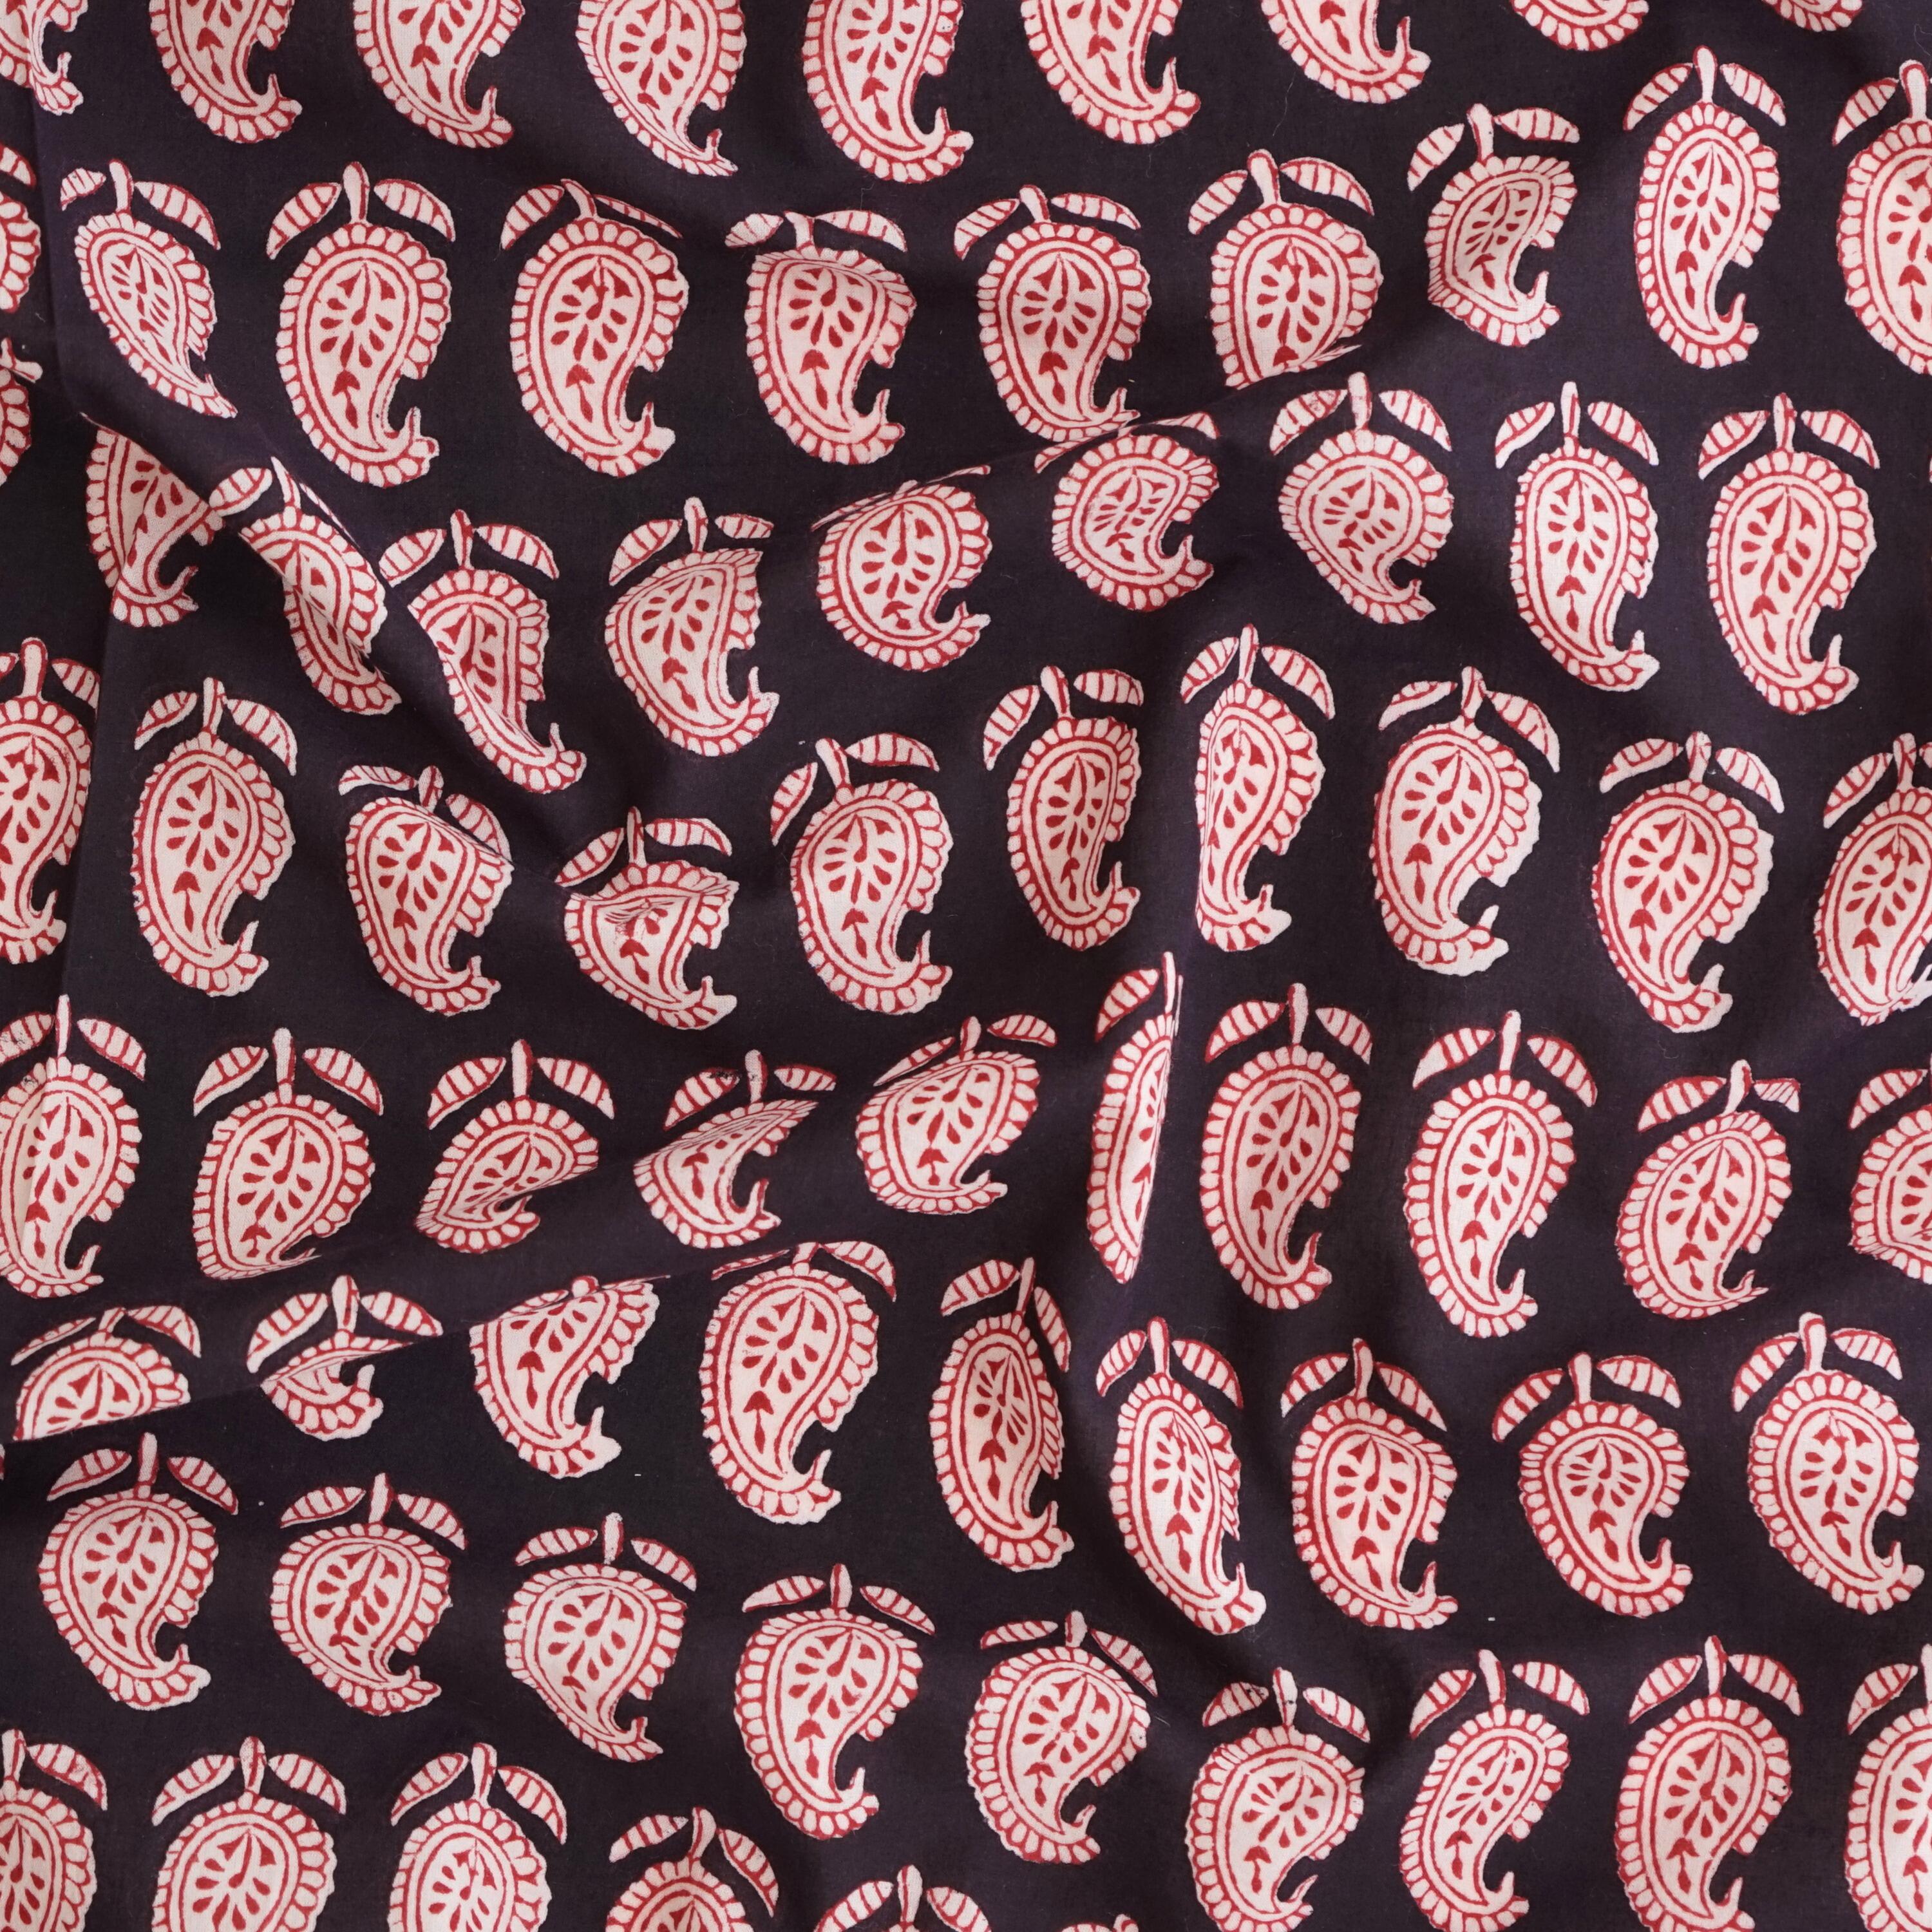 100% Block-Printed Cotton Fabric From India - Cactus Design - Iron Rust Black & Alizarin Red Dyes - Contrast